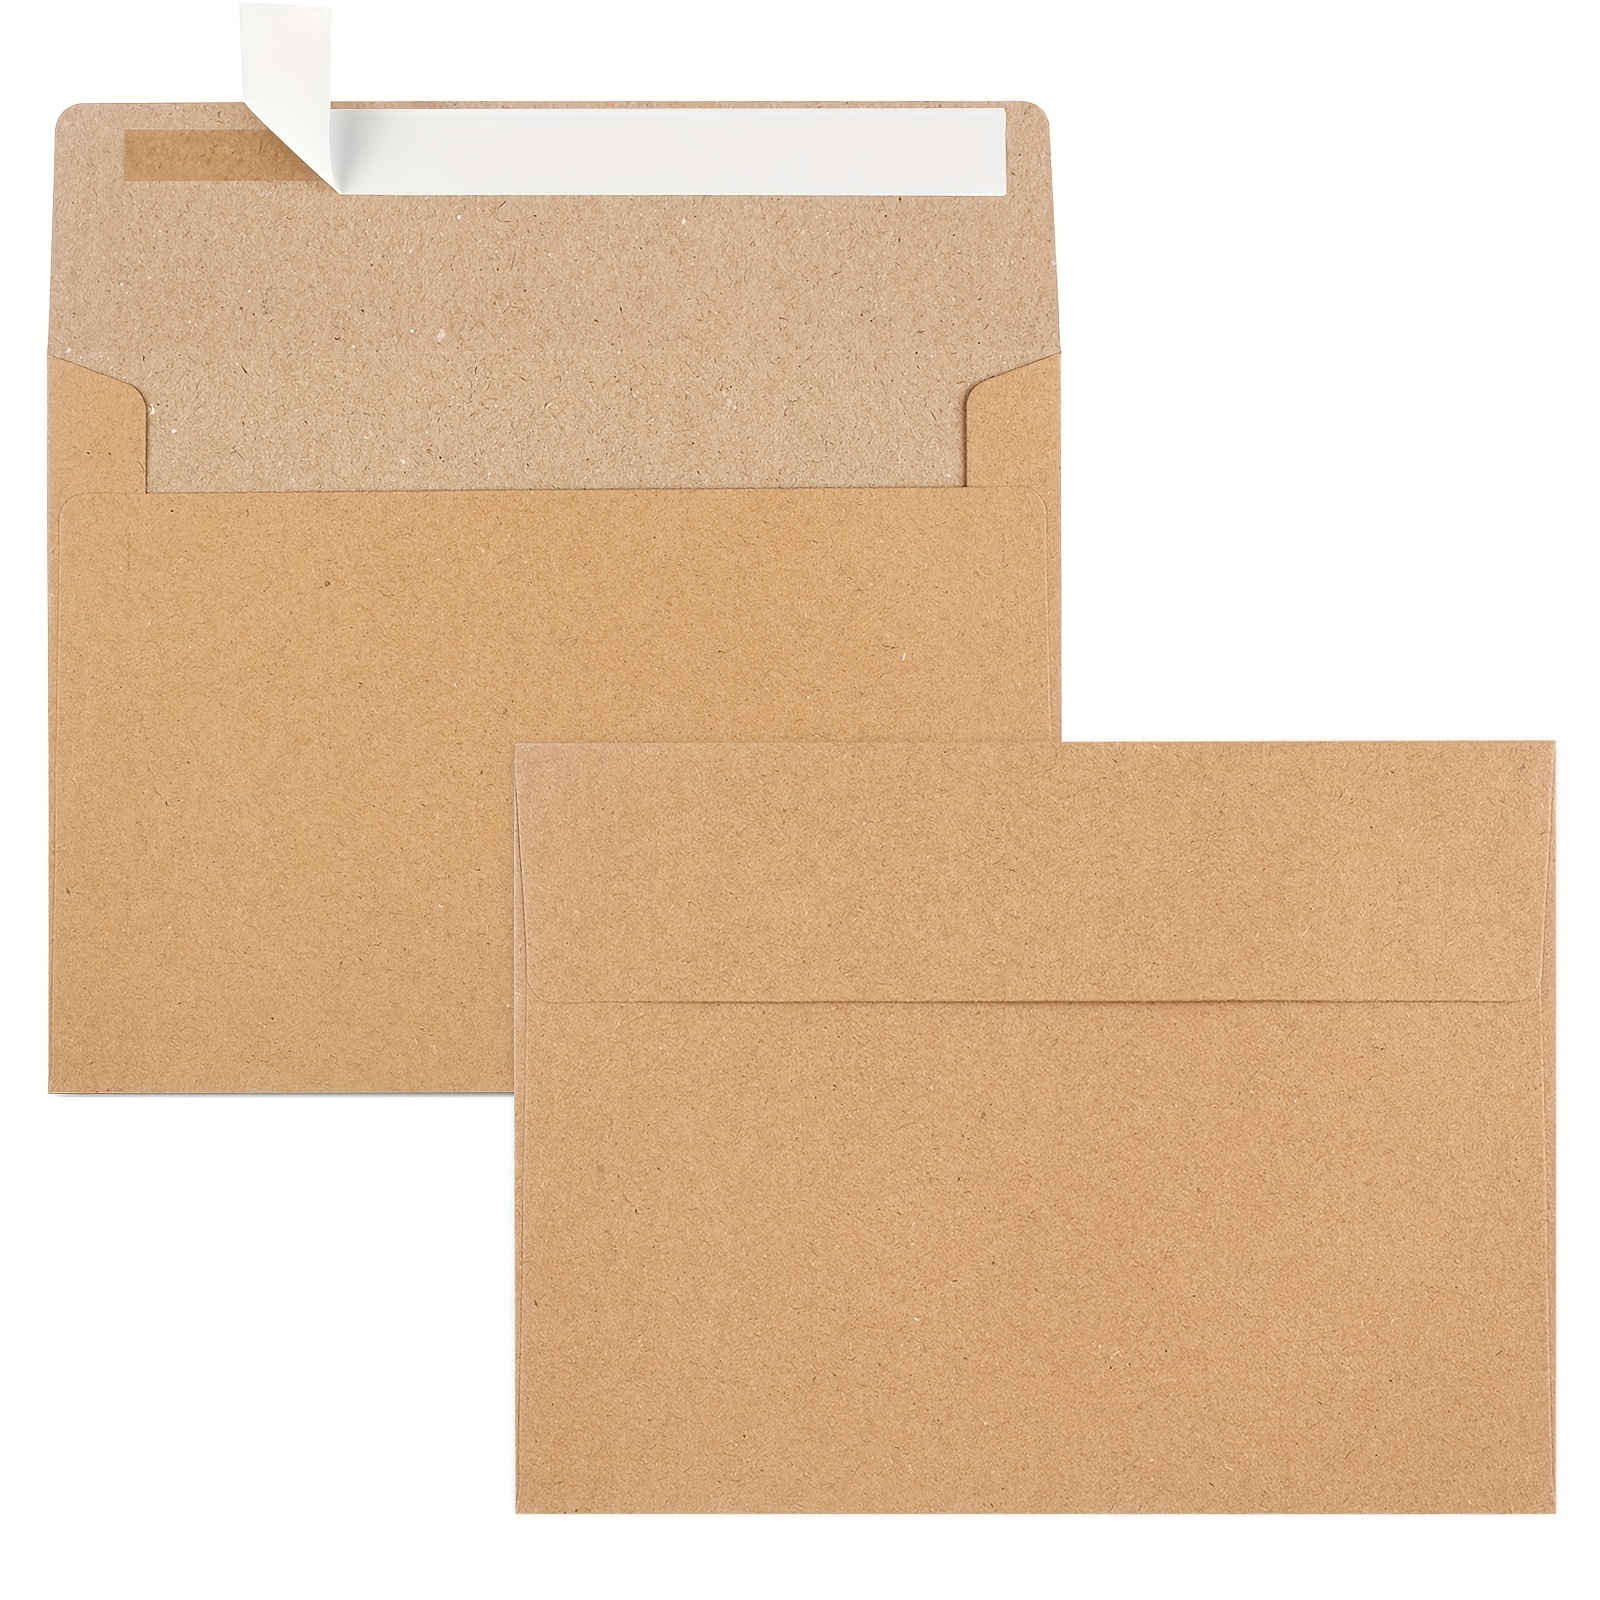 100 Pack, Size A2, Brown Kraft Paper Envelopes | Self Sealing Adhesive|  Perfect for Weddings, RSVP, Invitations, Baby Shower,Greeting